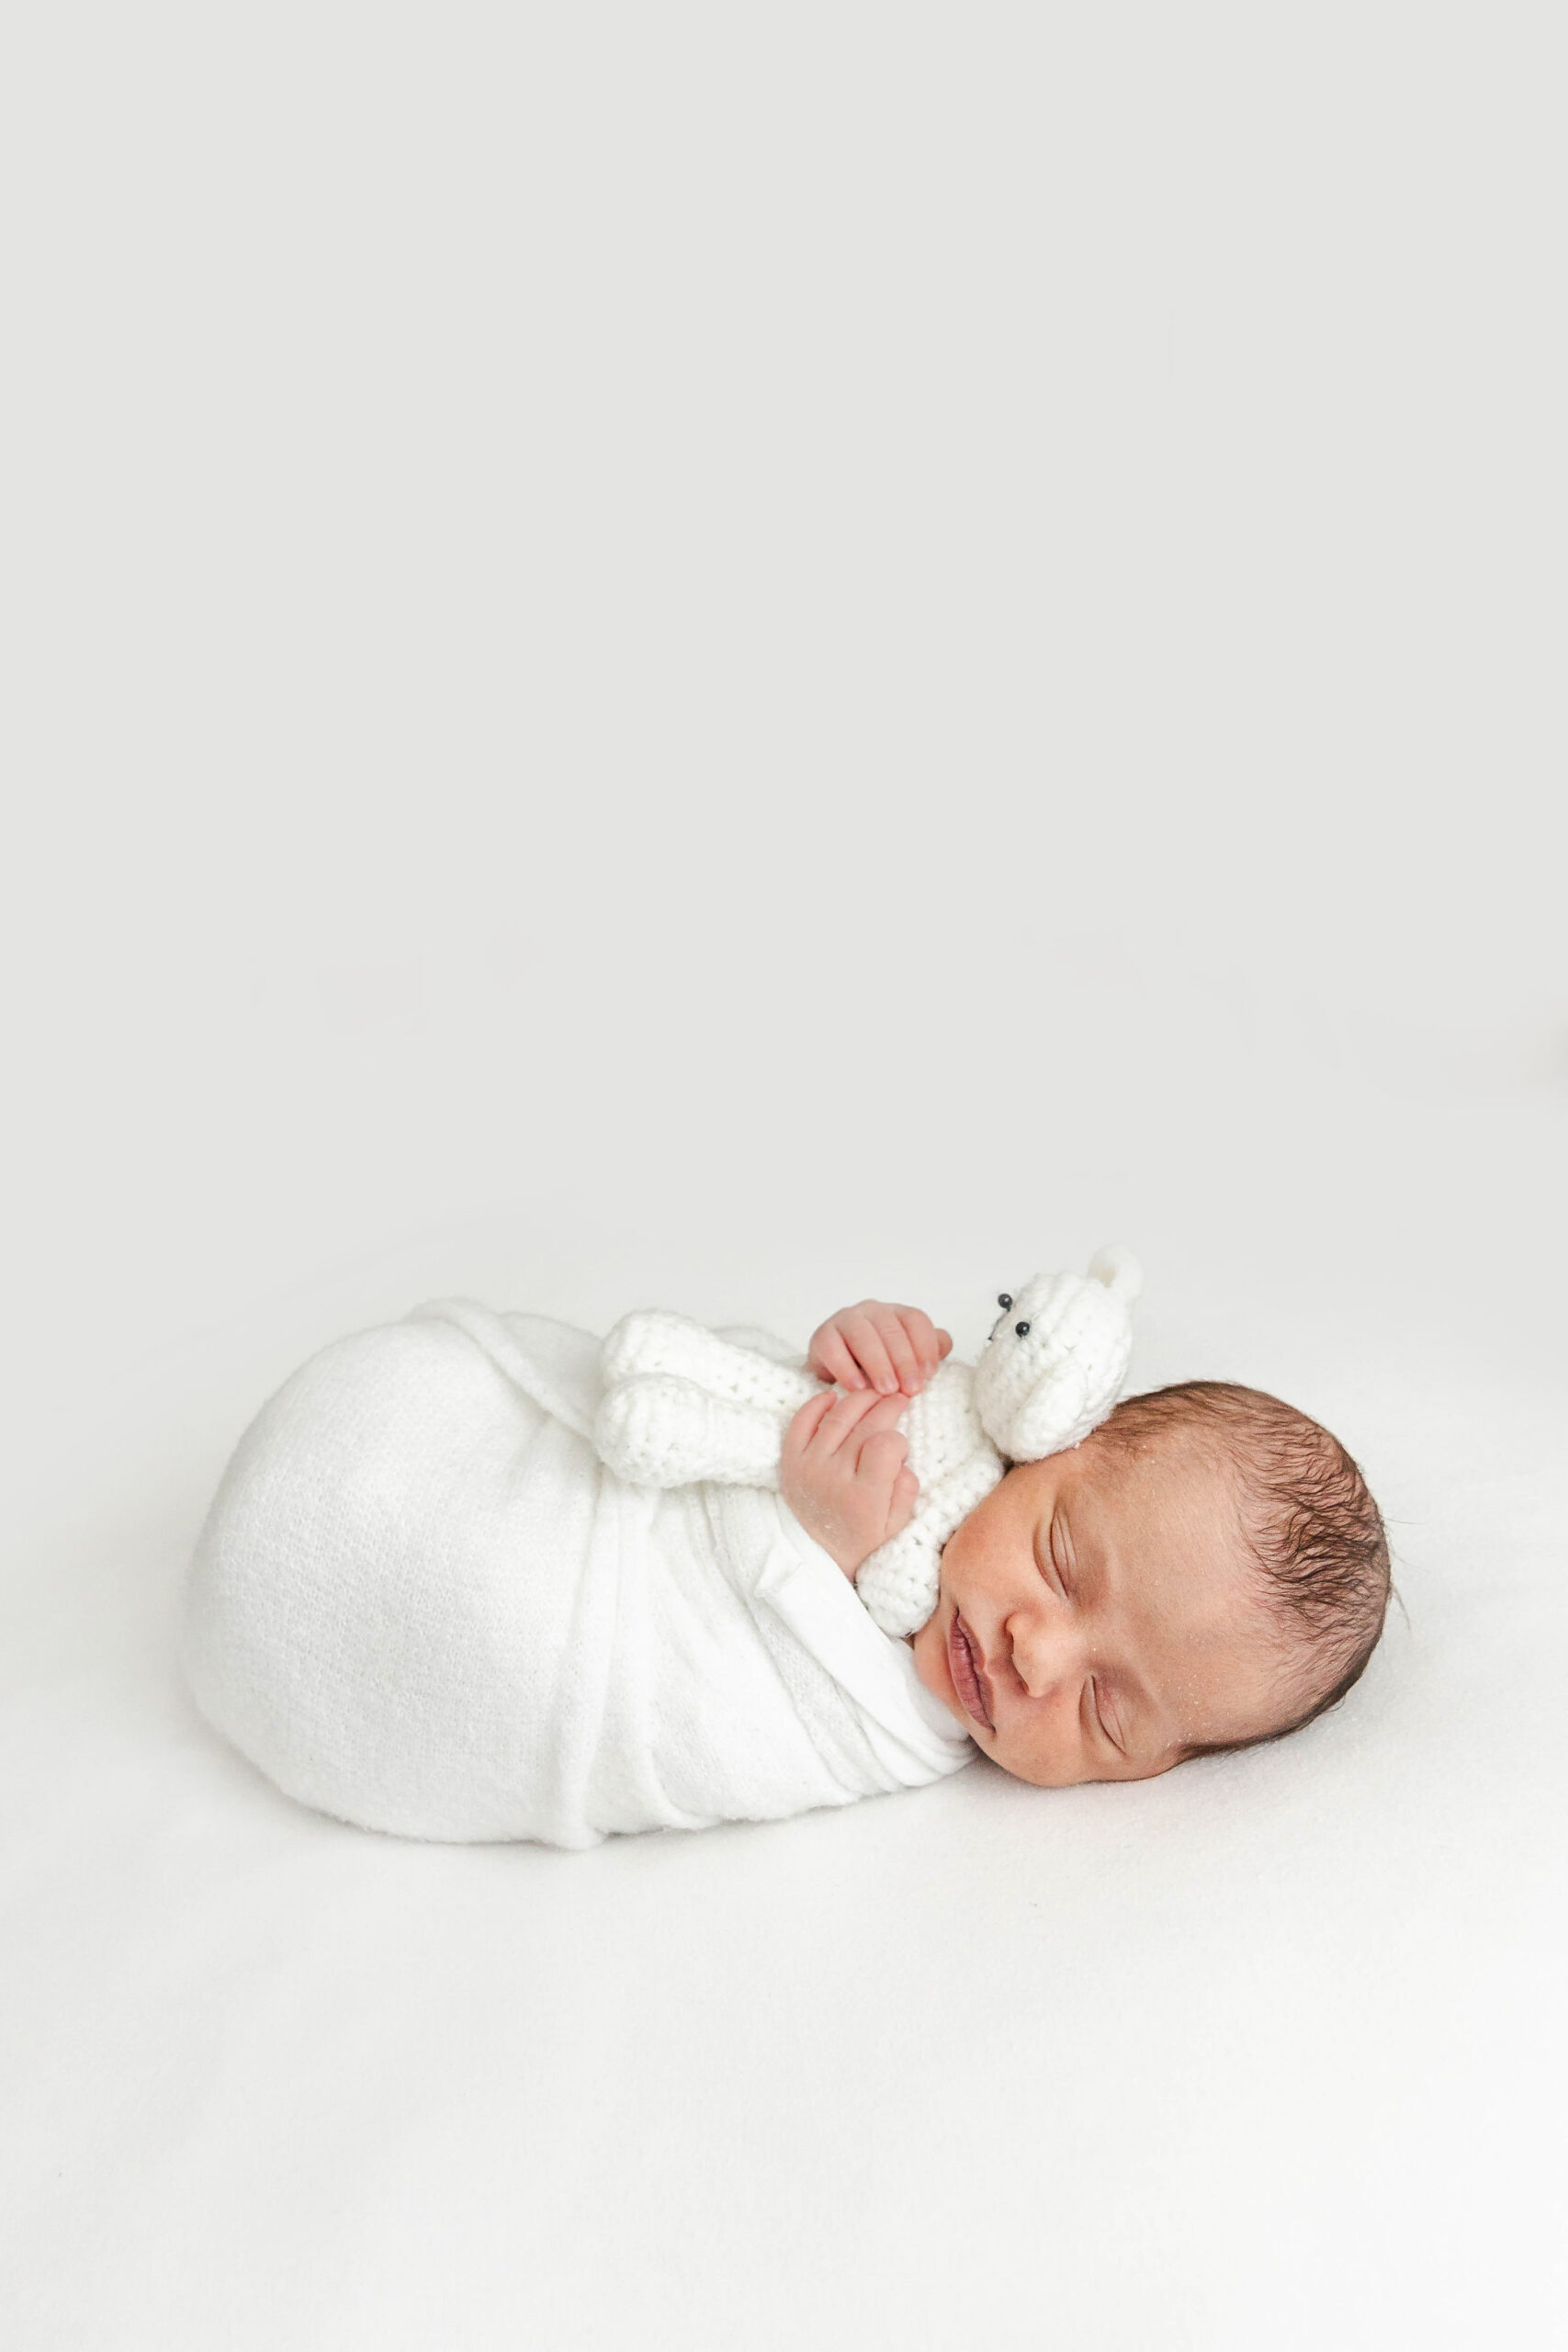 A newborn baby sleeps while clutching a white knit bear in a white swaddle thanks to a pediatric chiropractor miami